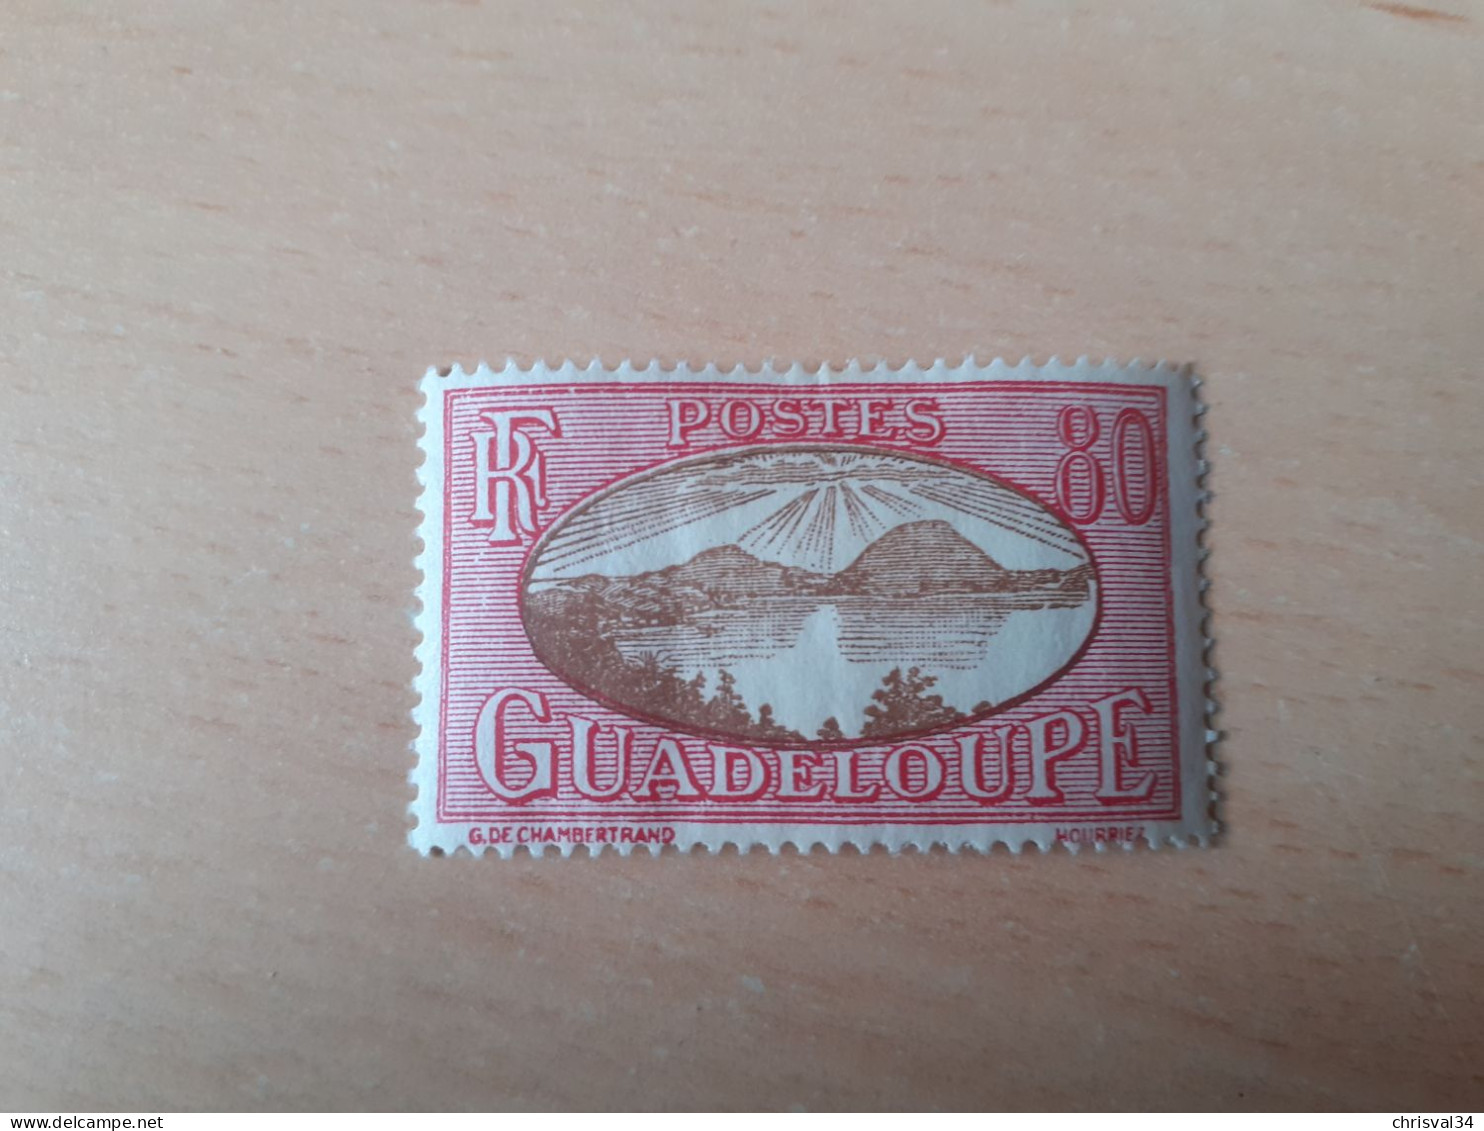 TIMBRE   GUADELOUPE       N  112A     COTE  1,00   EUROS  NEUF  TRACE  CHARNIERE - Ungebraucht